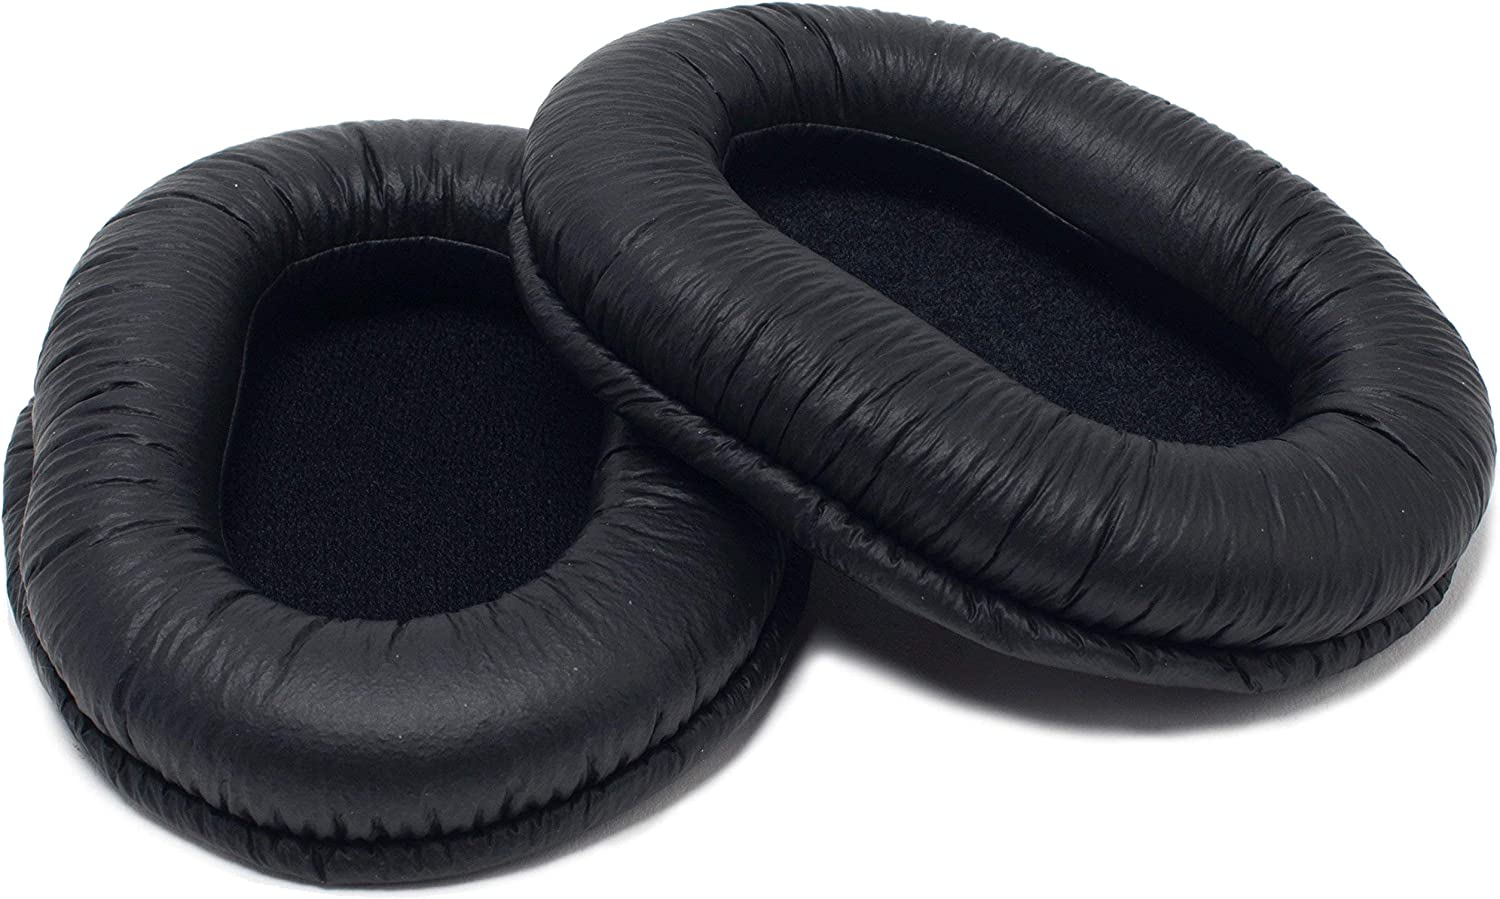 Genuine Replacement Ear Pads cushions for SONY MDR-7506, MDR